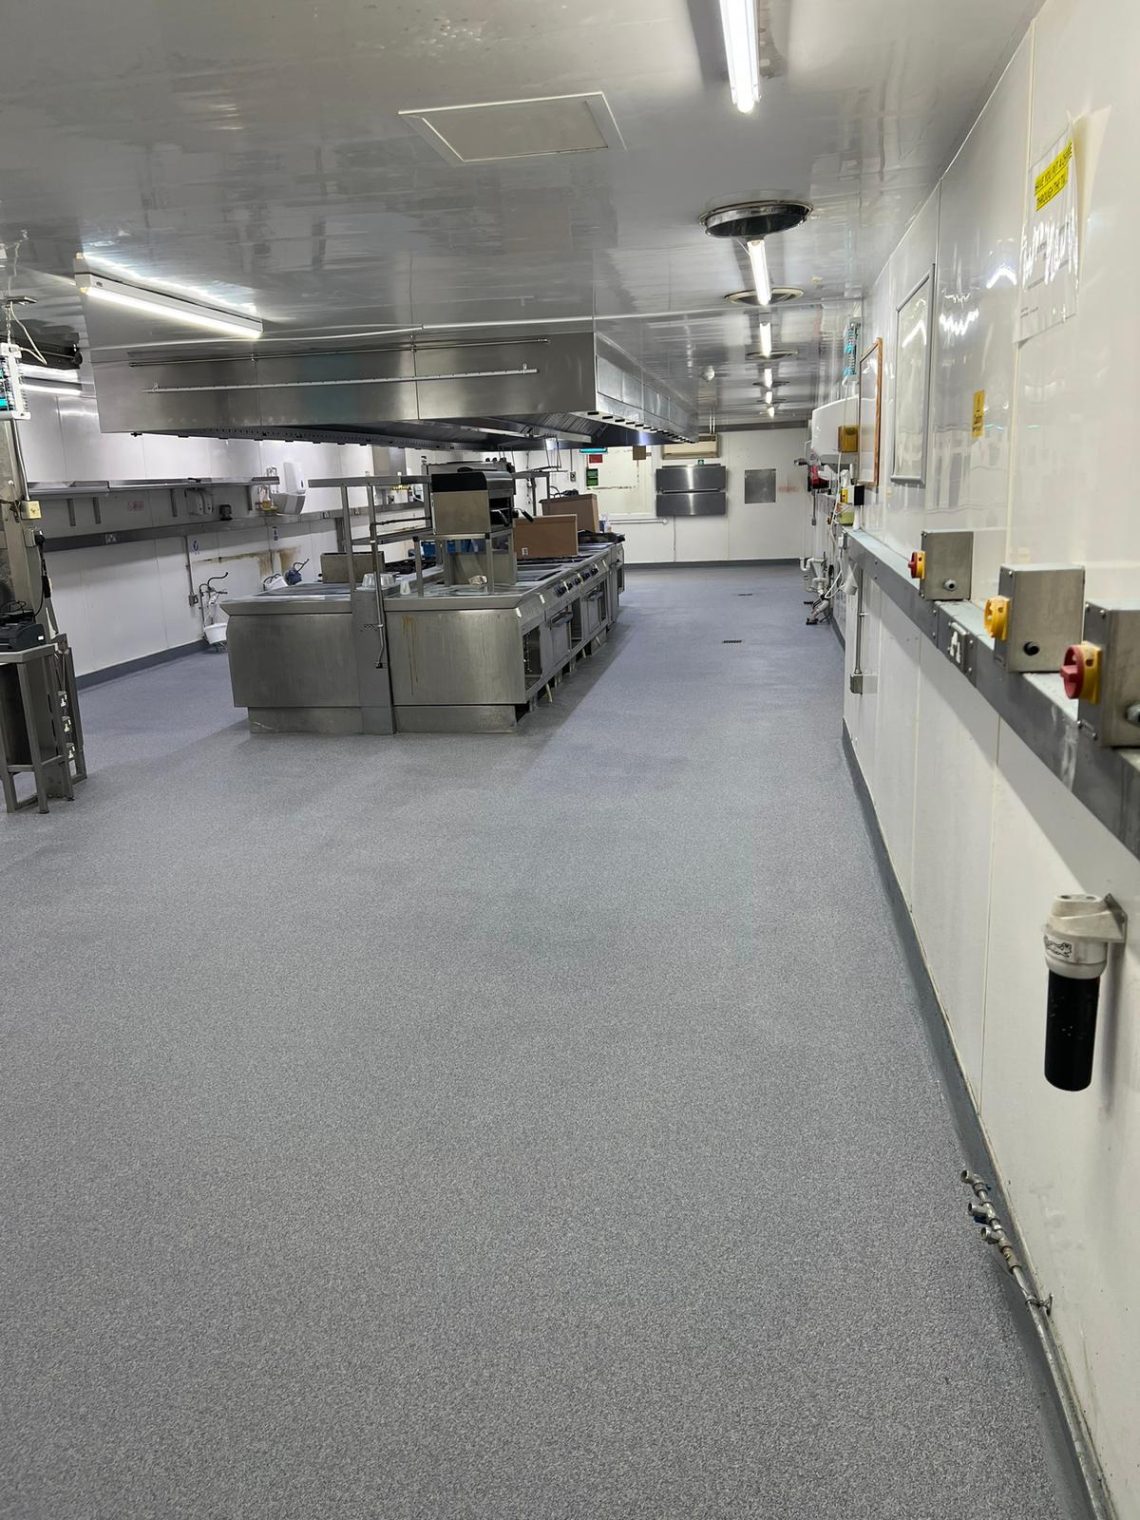 Kilworth House kitchen facilities upgrade project by RESYN